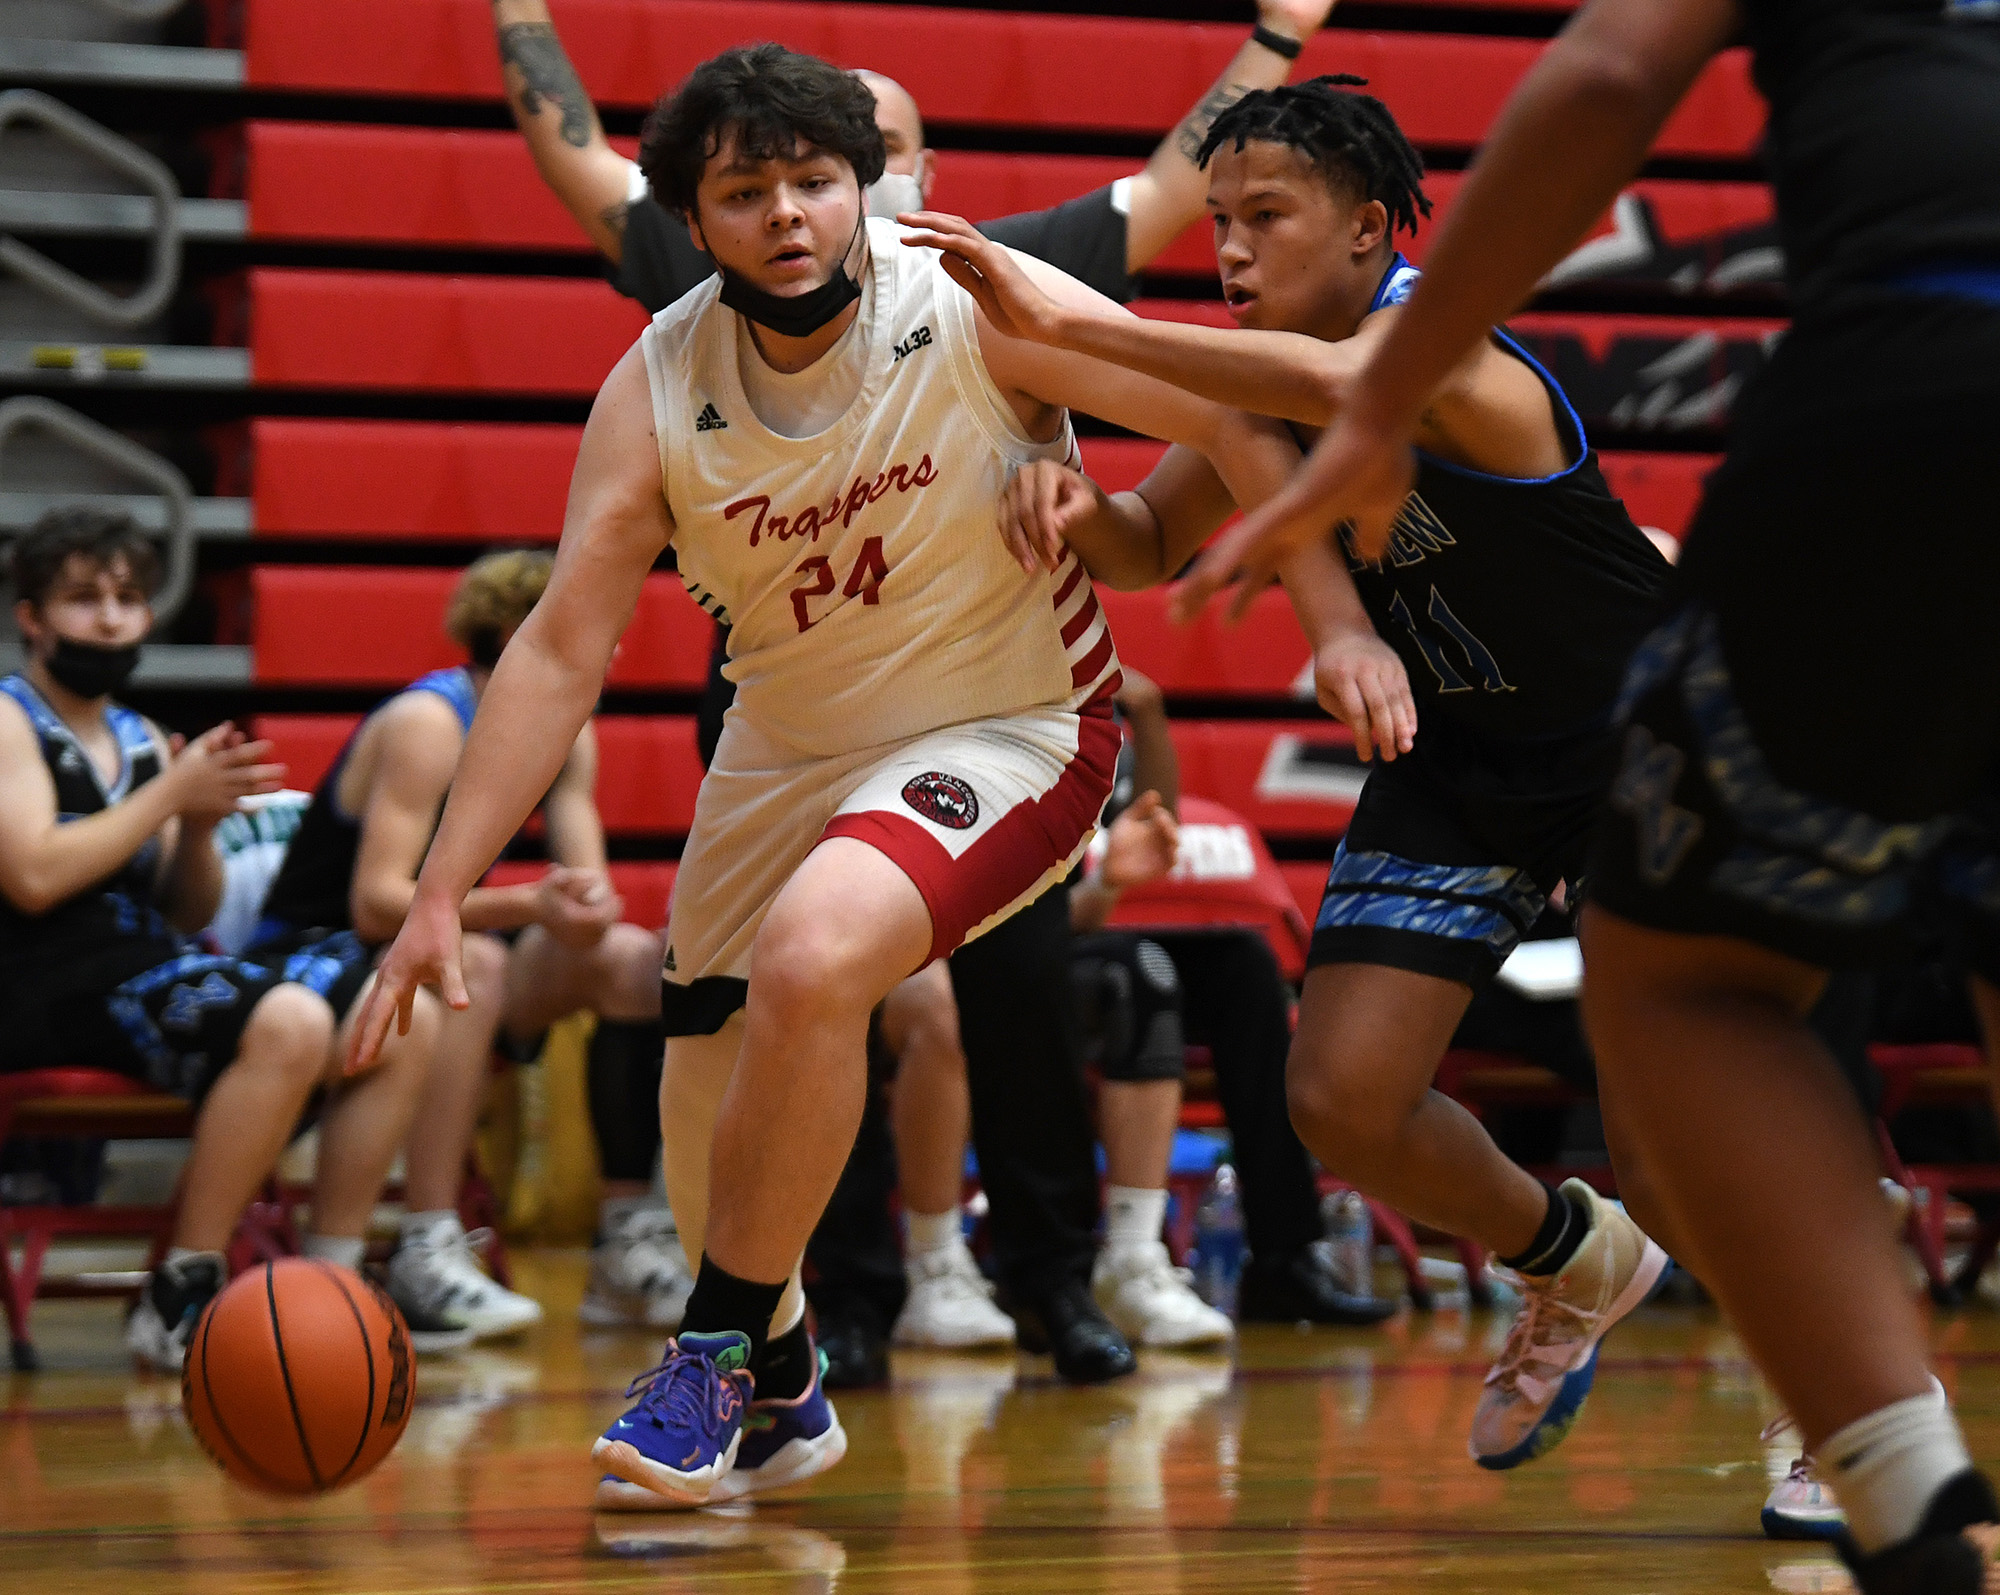 Fort Vancouver senior Dean Cadena, left, dribbles the ball under pressure from Mountain View junior Michael Tauscher on Tuesday, Nov. 30, 2021, during the Trappers’ 73-46 loss to the Thunder at Fort Vancouver High School.